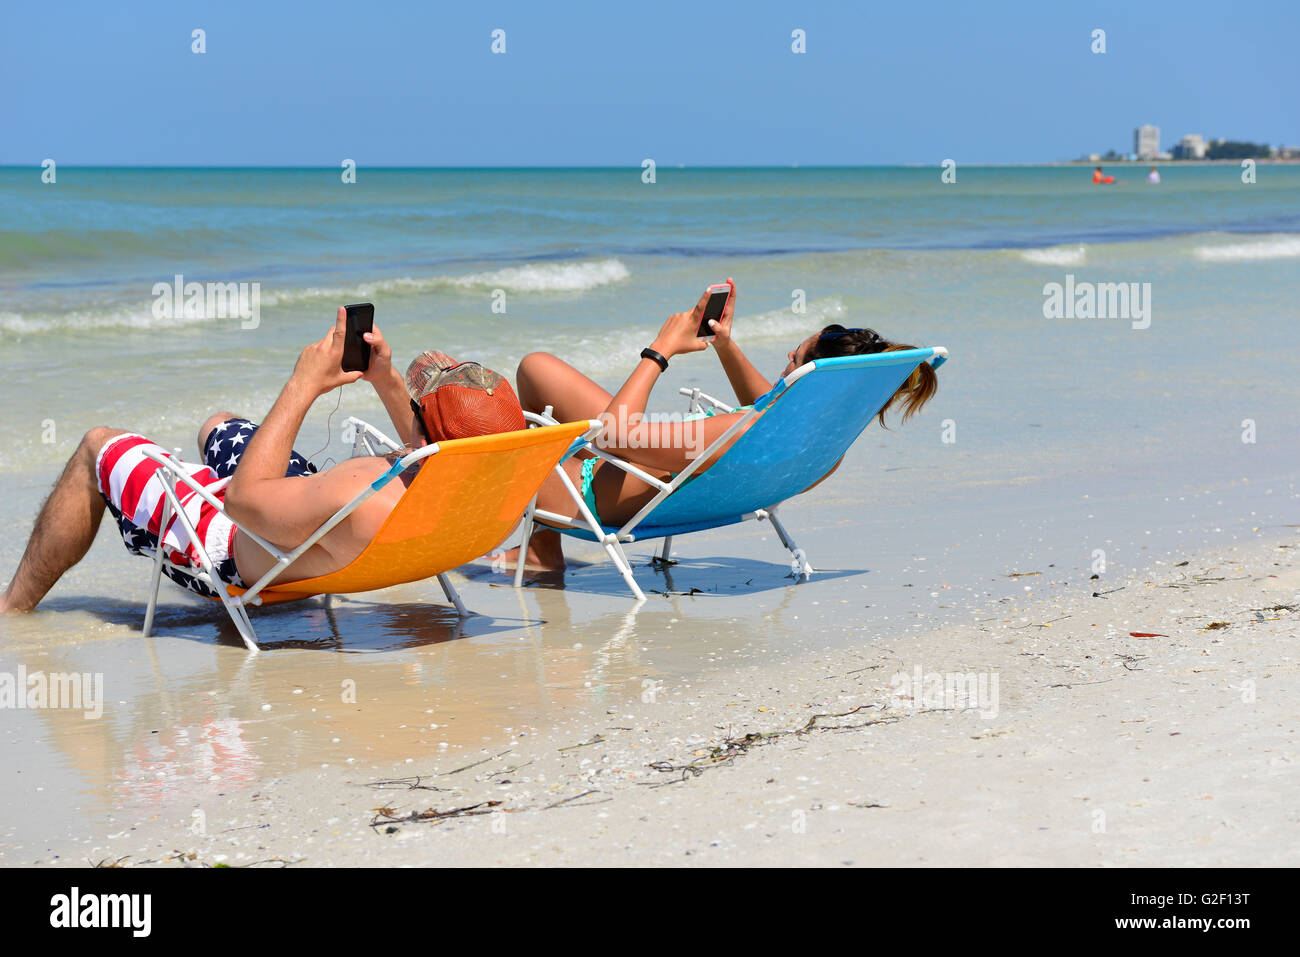 Preoccupied couple can't stop looking at their cell phones to enjoy each other or the beach shoreline while reclining in chairs Stock Photo